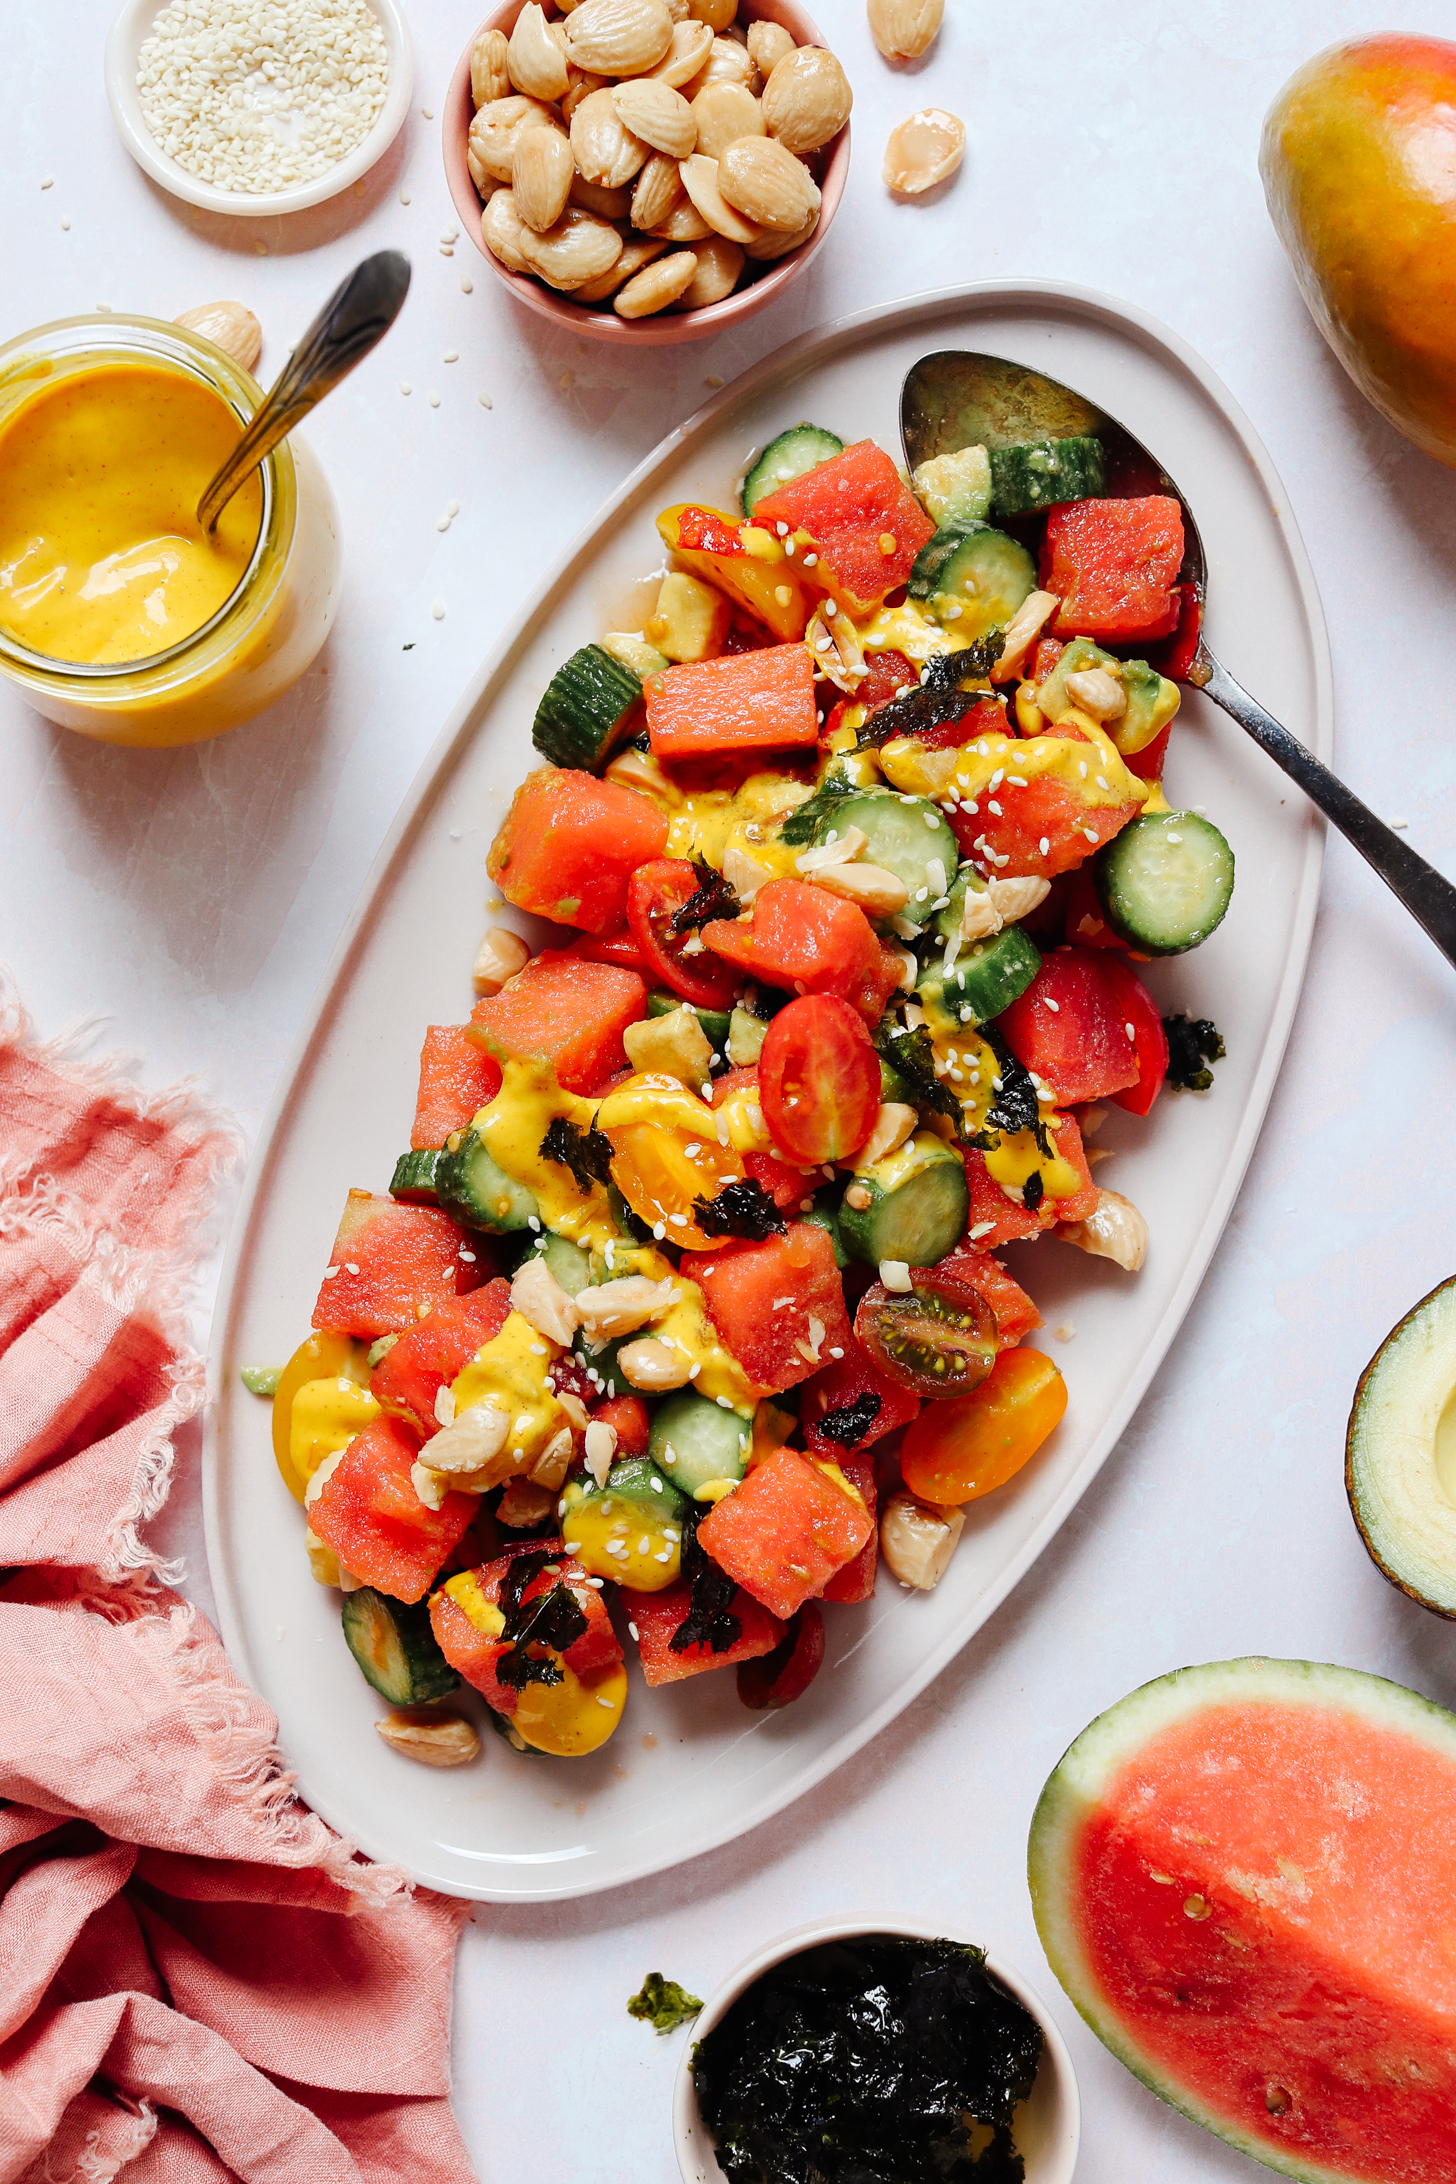 Platter of spicy watermelon salad inspired by True Food Kitchen